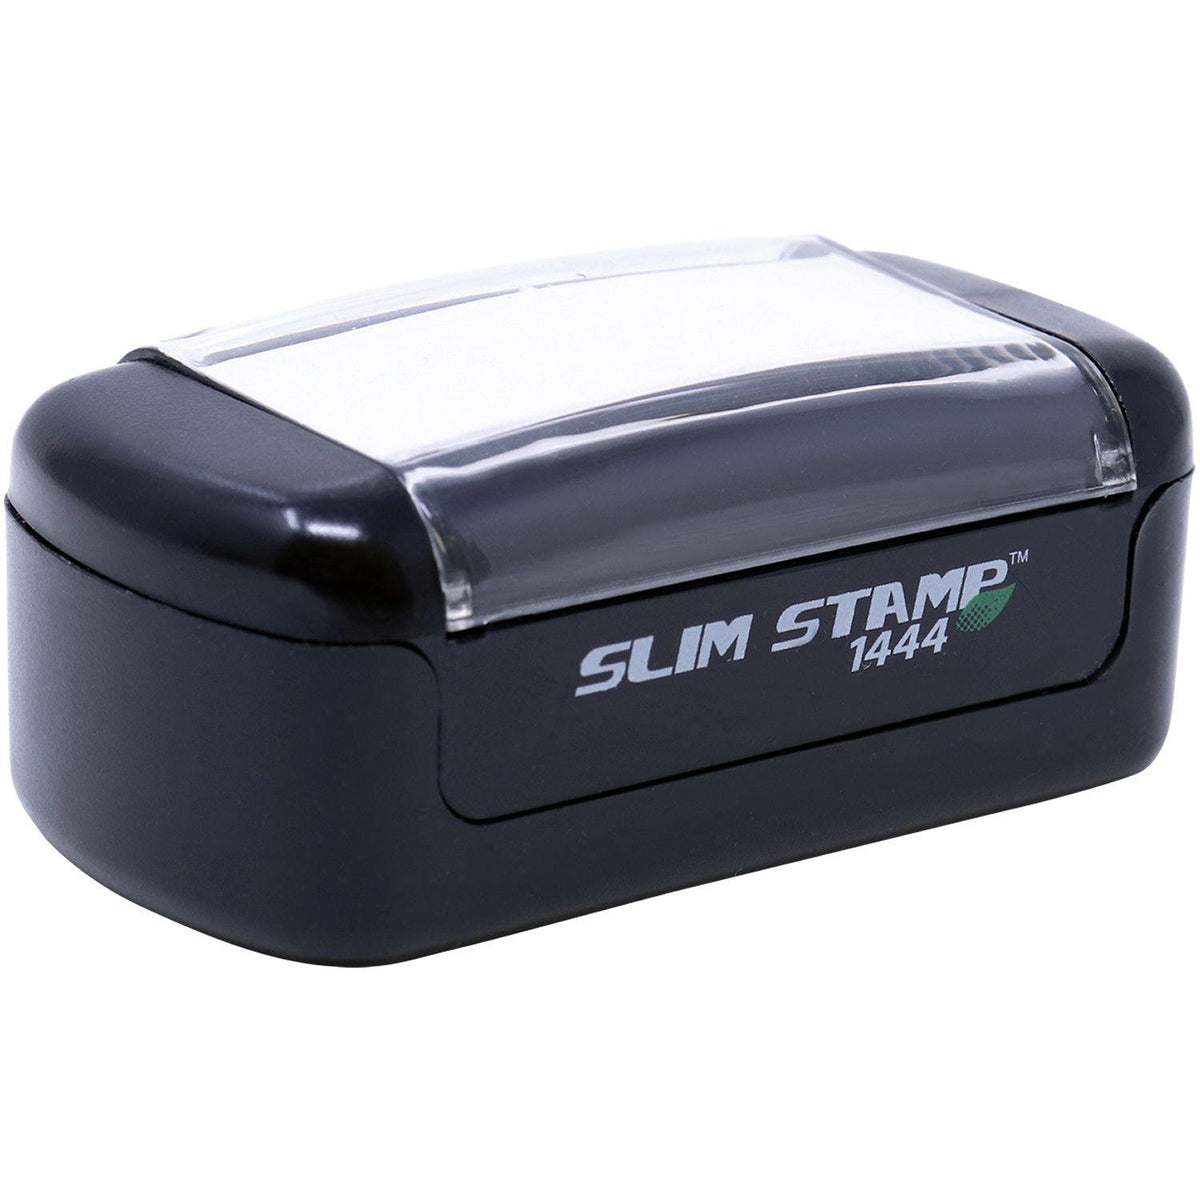 Alt View of Slim Pre-Inked Patients Signature on File Stamp Mount Angle